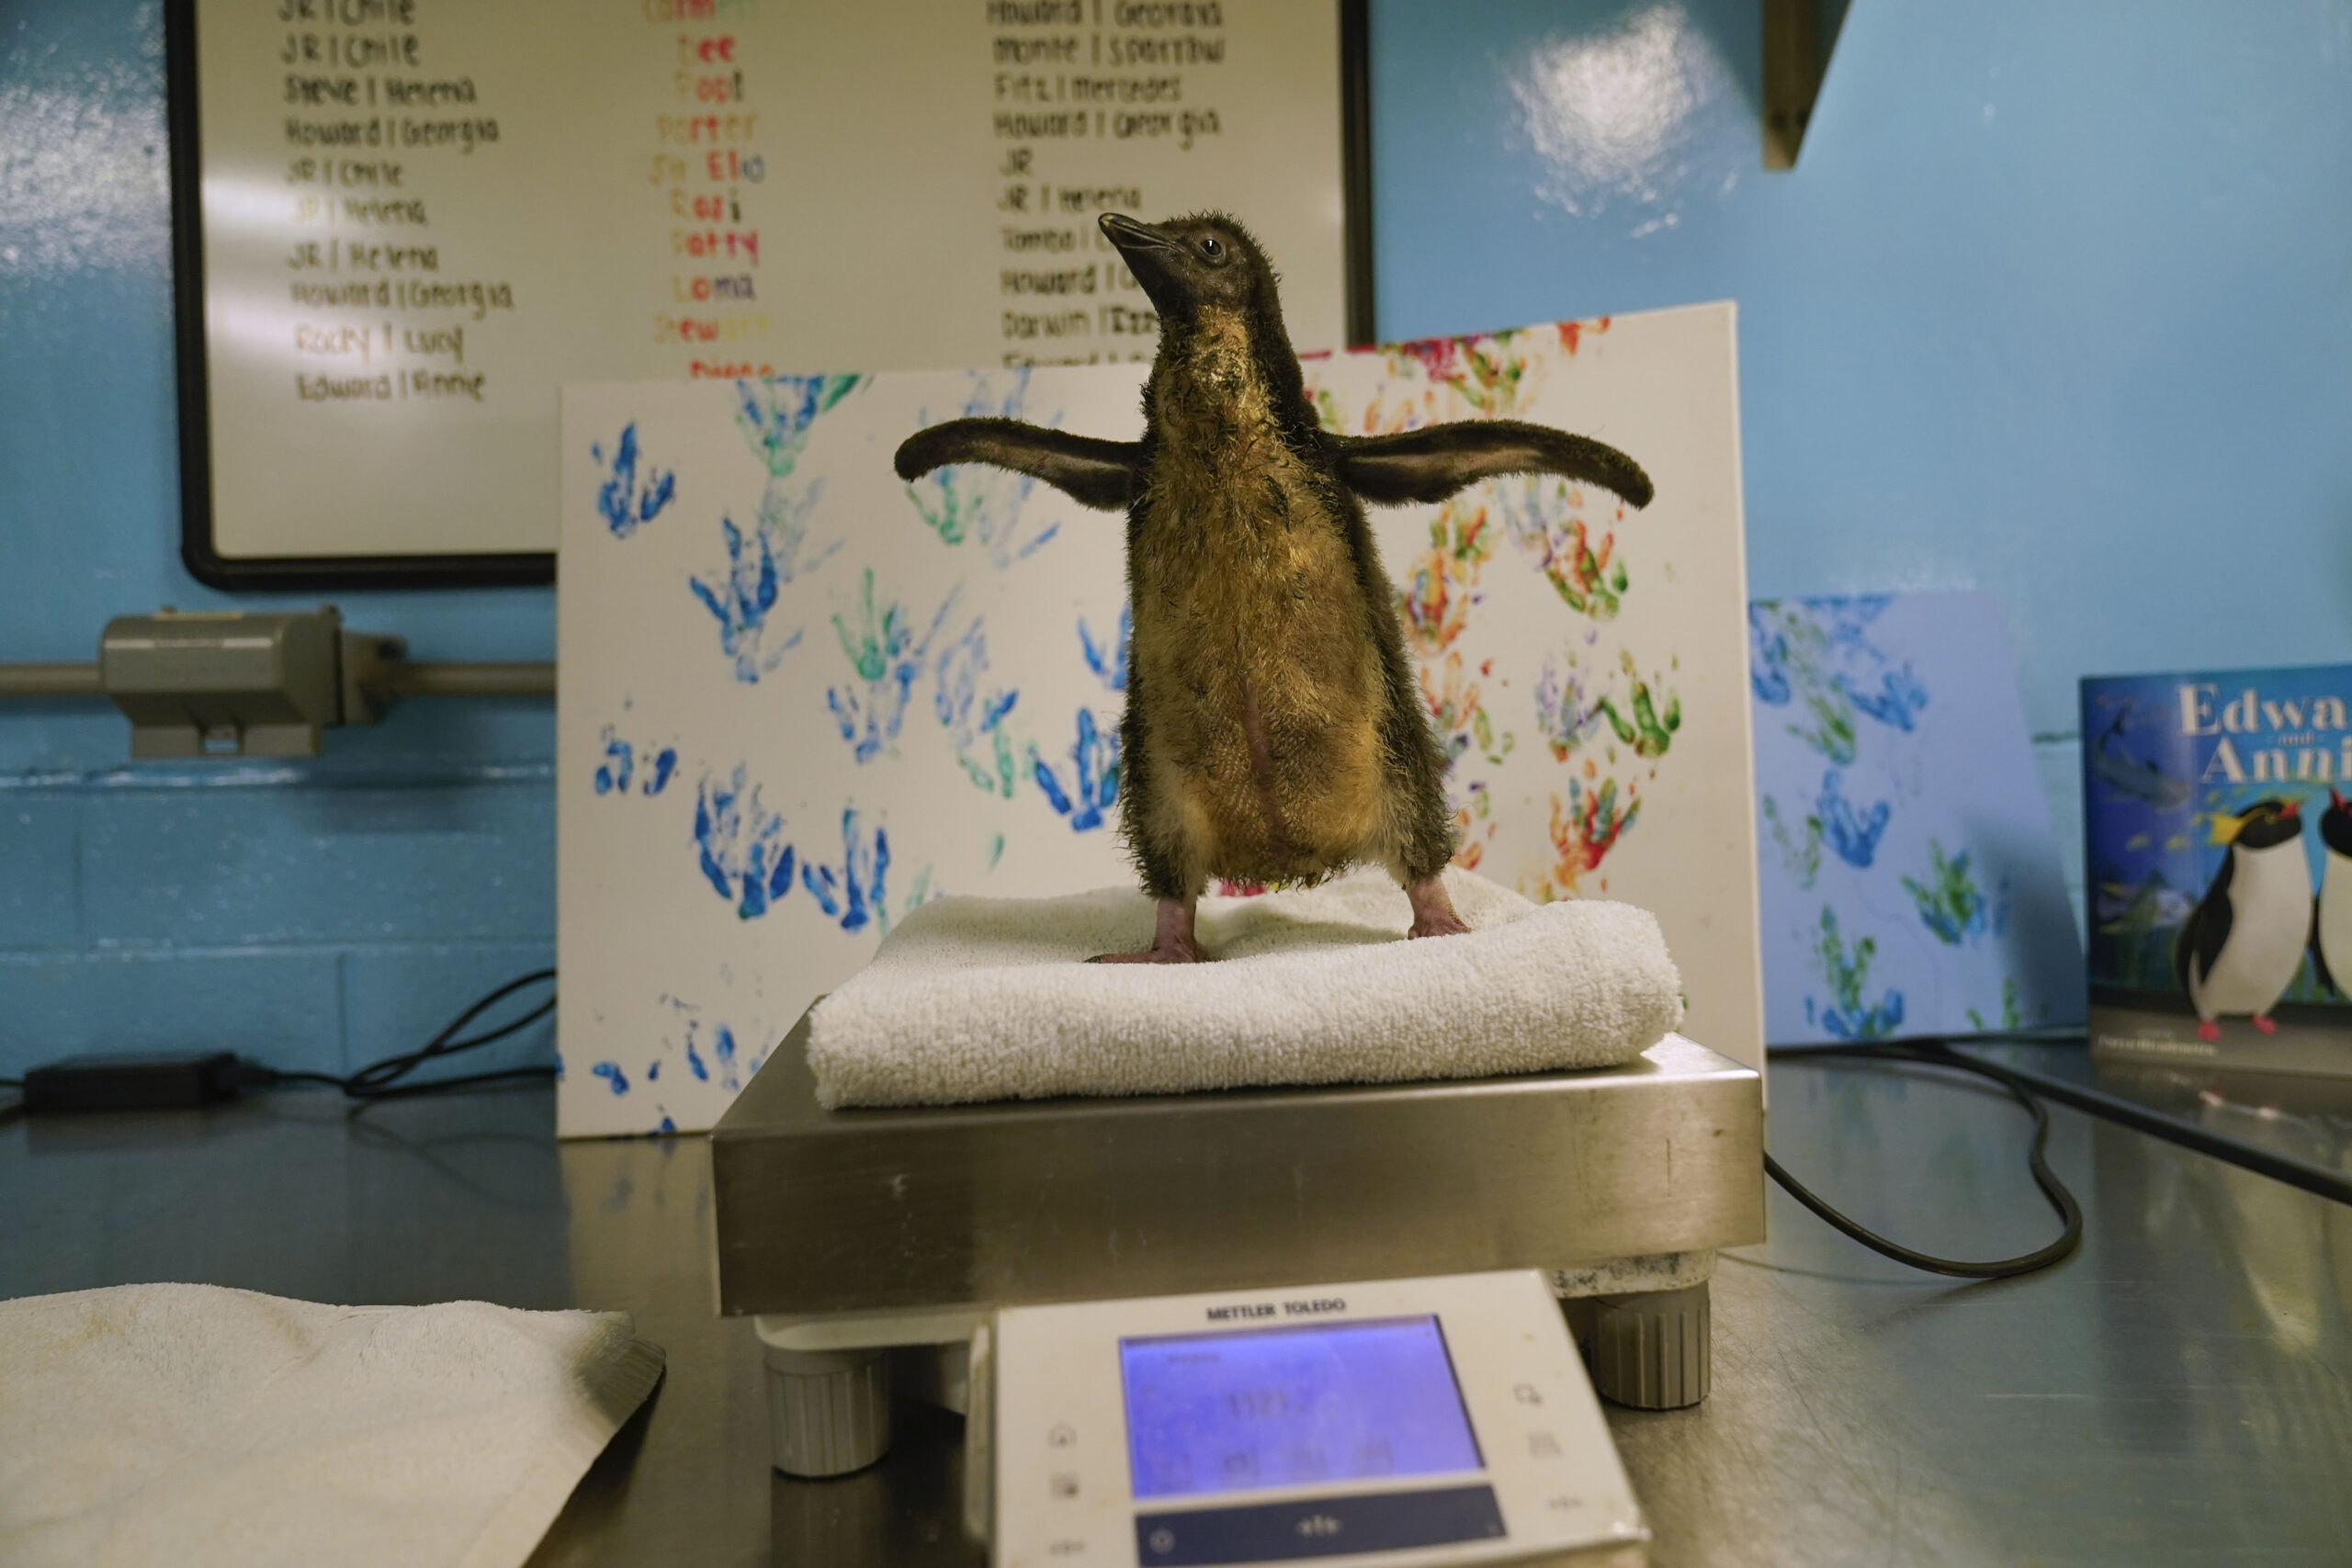 The newest member of Shedd Aquarium's penguin population, a southern rockhopper chick who hatched o...